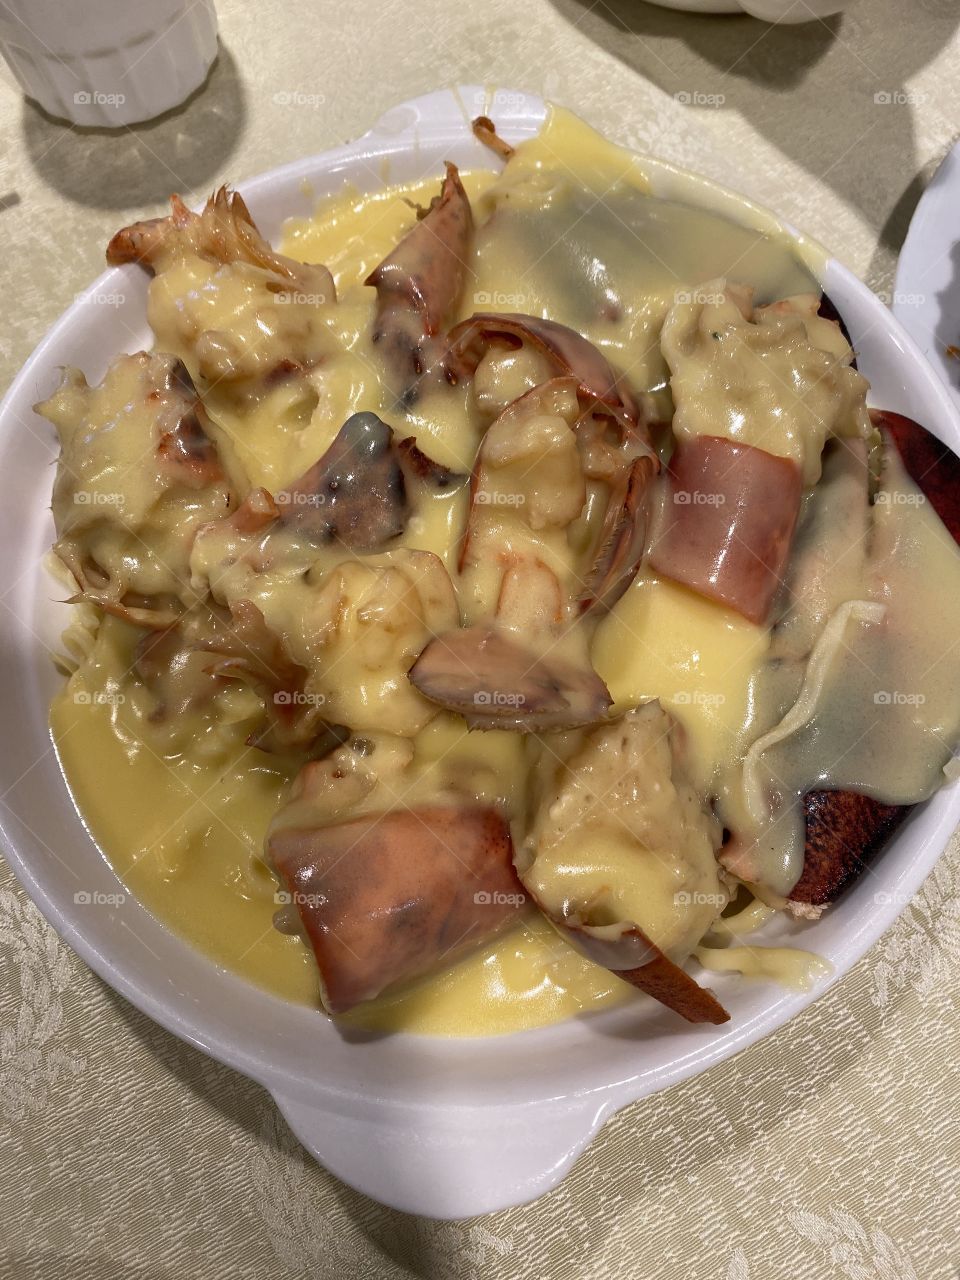 Cheese lobsters with E-fu noodles